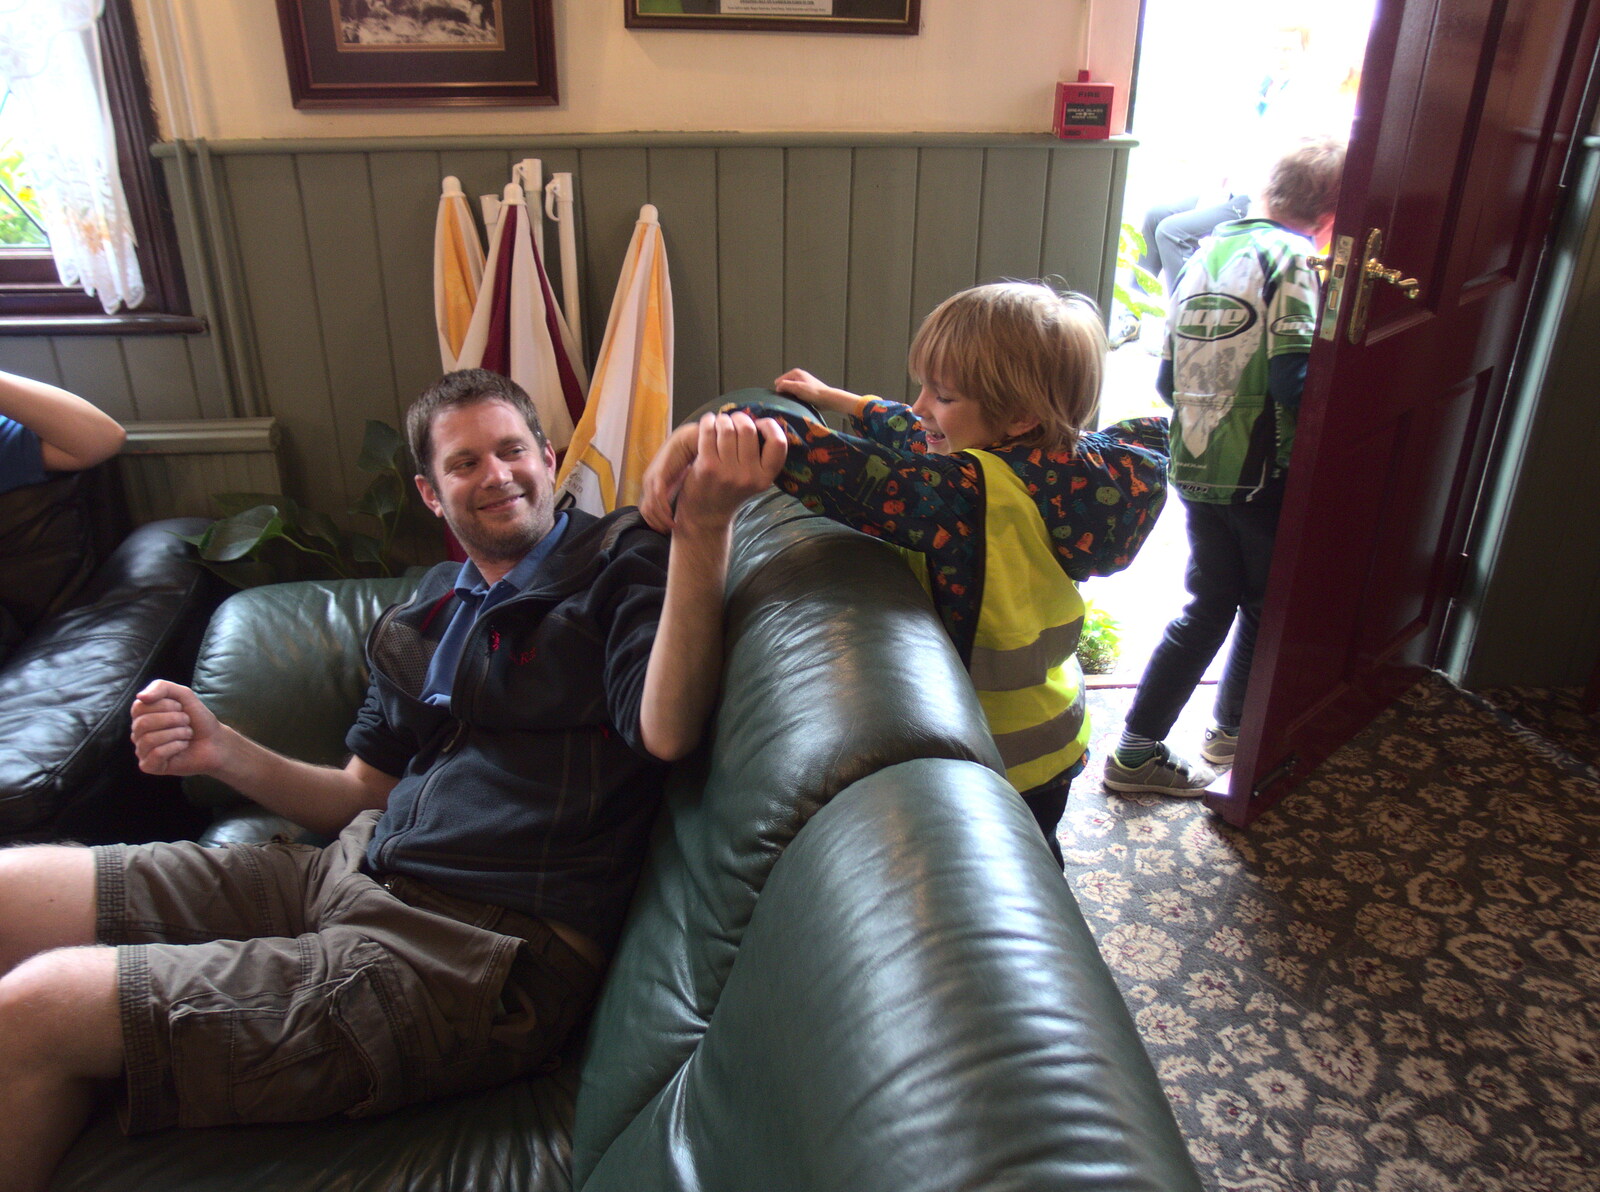 Phil and Harry wrestle on the sofa from The Last-Ever BSCC Weekend Away Bike Ride, Thaxted, Essex - 6th May 2017